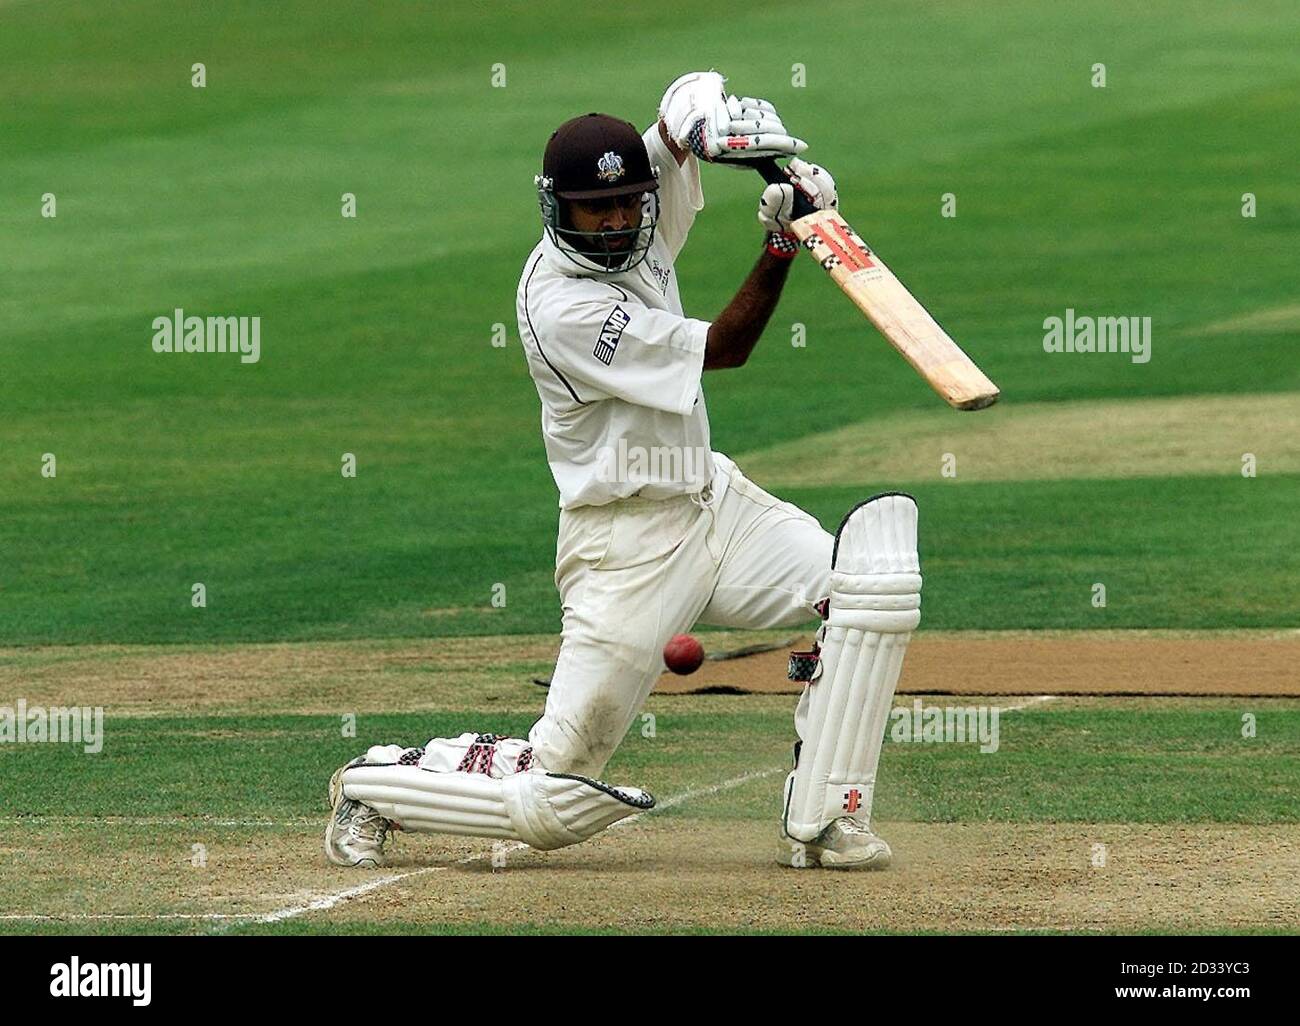 Surrey batsman Nadeem Shahid drives a delivery from Warwickshire's Melvyn Betts on his way to completing his half century during the Frizzell County Championship match at Edgbaston, Birmingham. Stock Photo